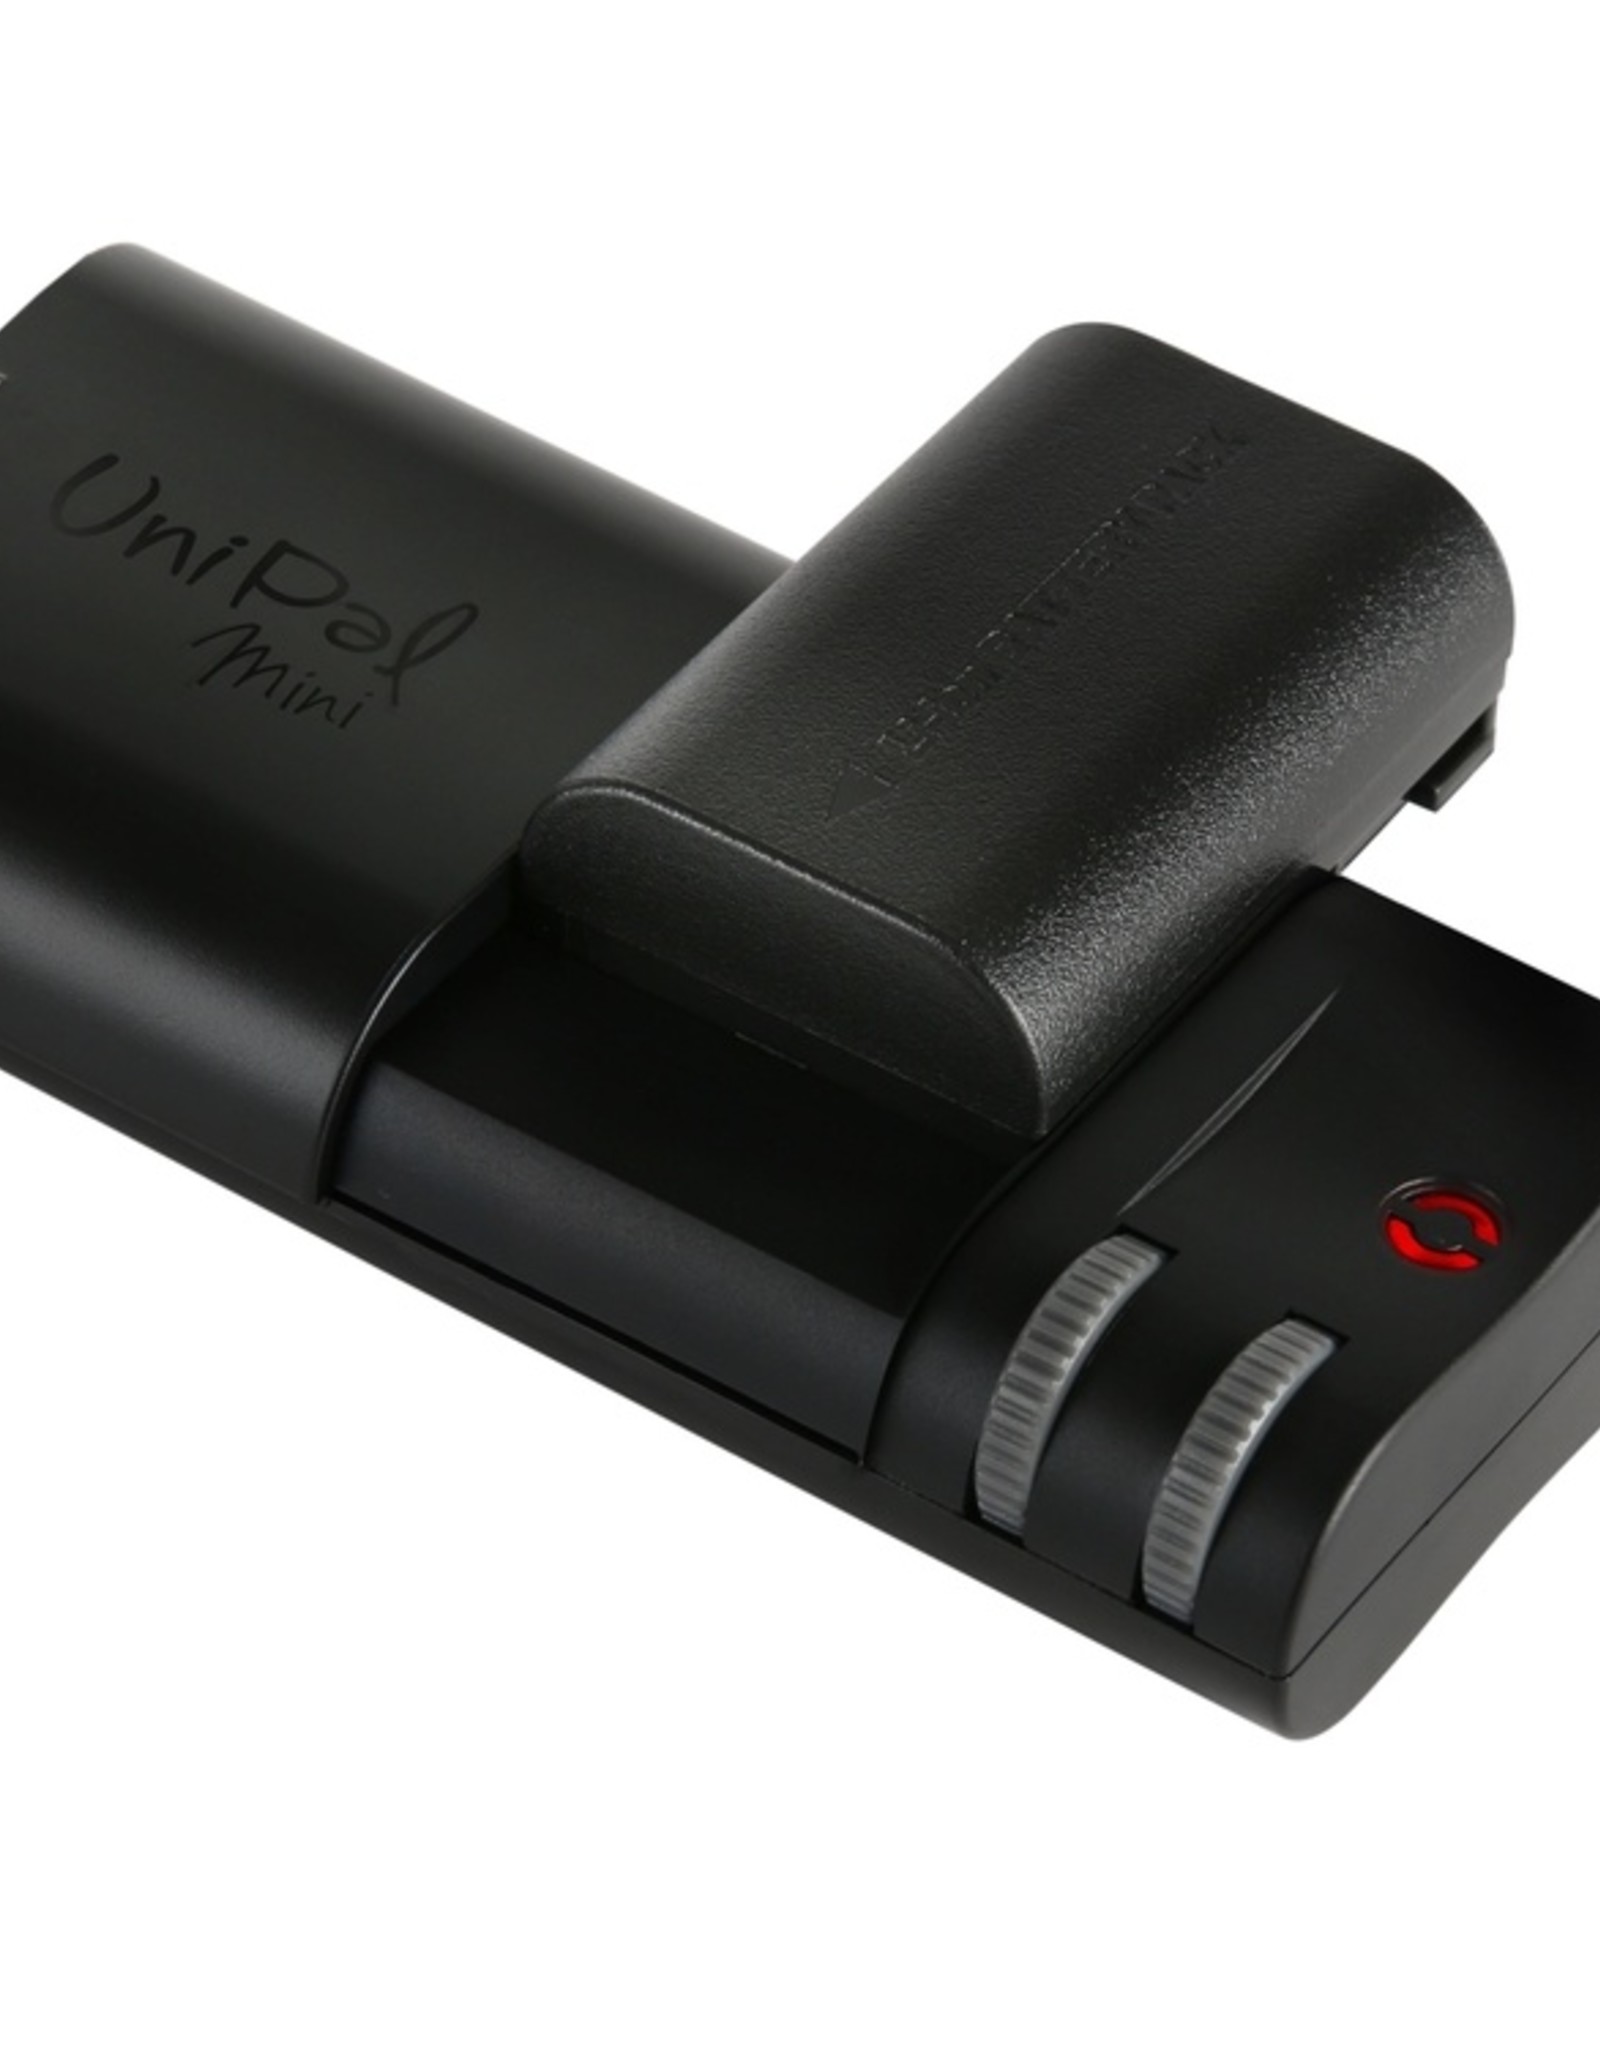 Hahnel UniPal Mini II Portable Battery Charger